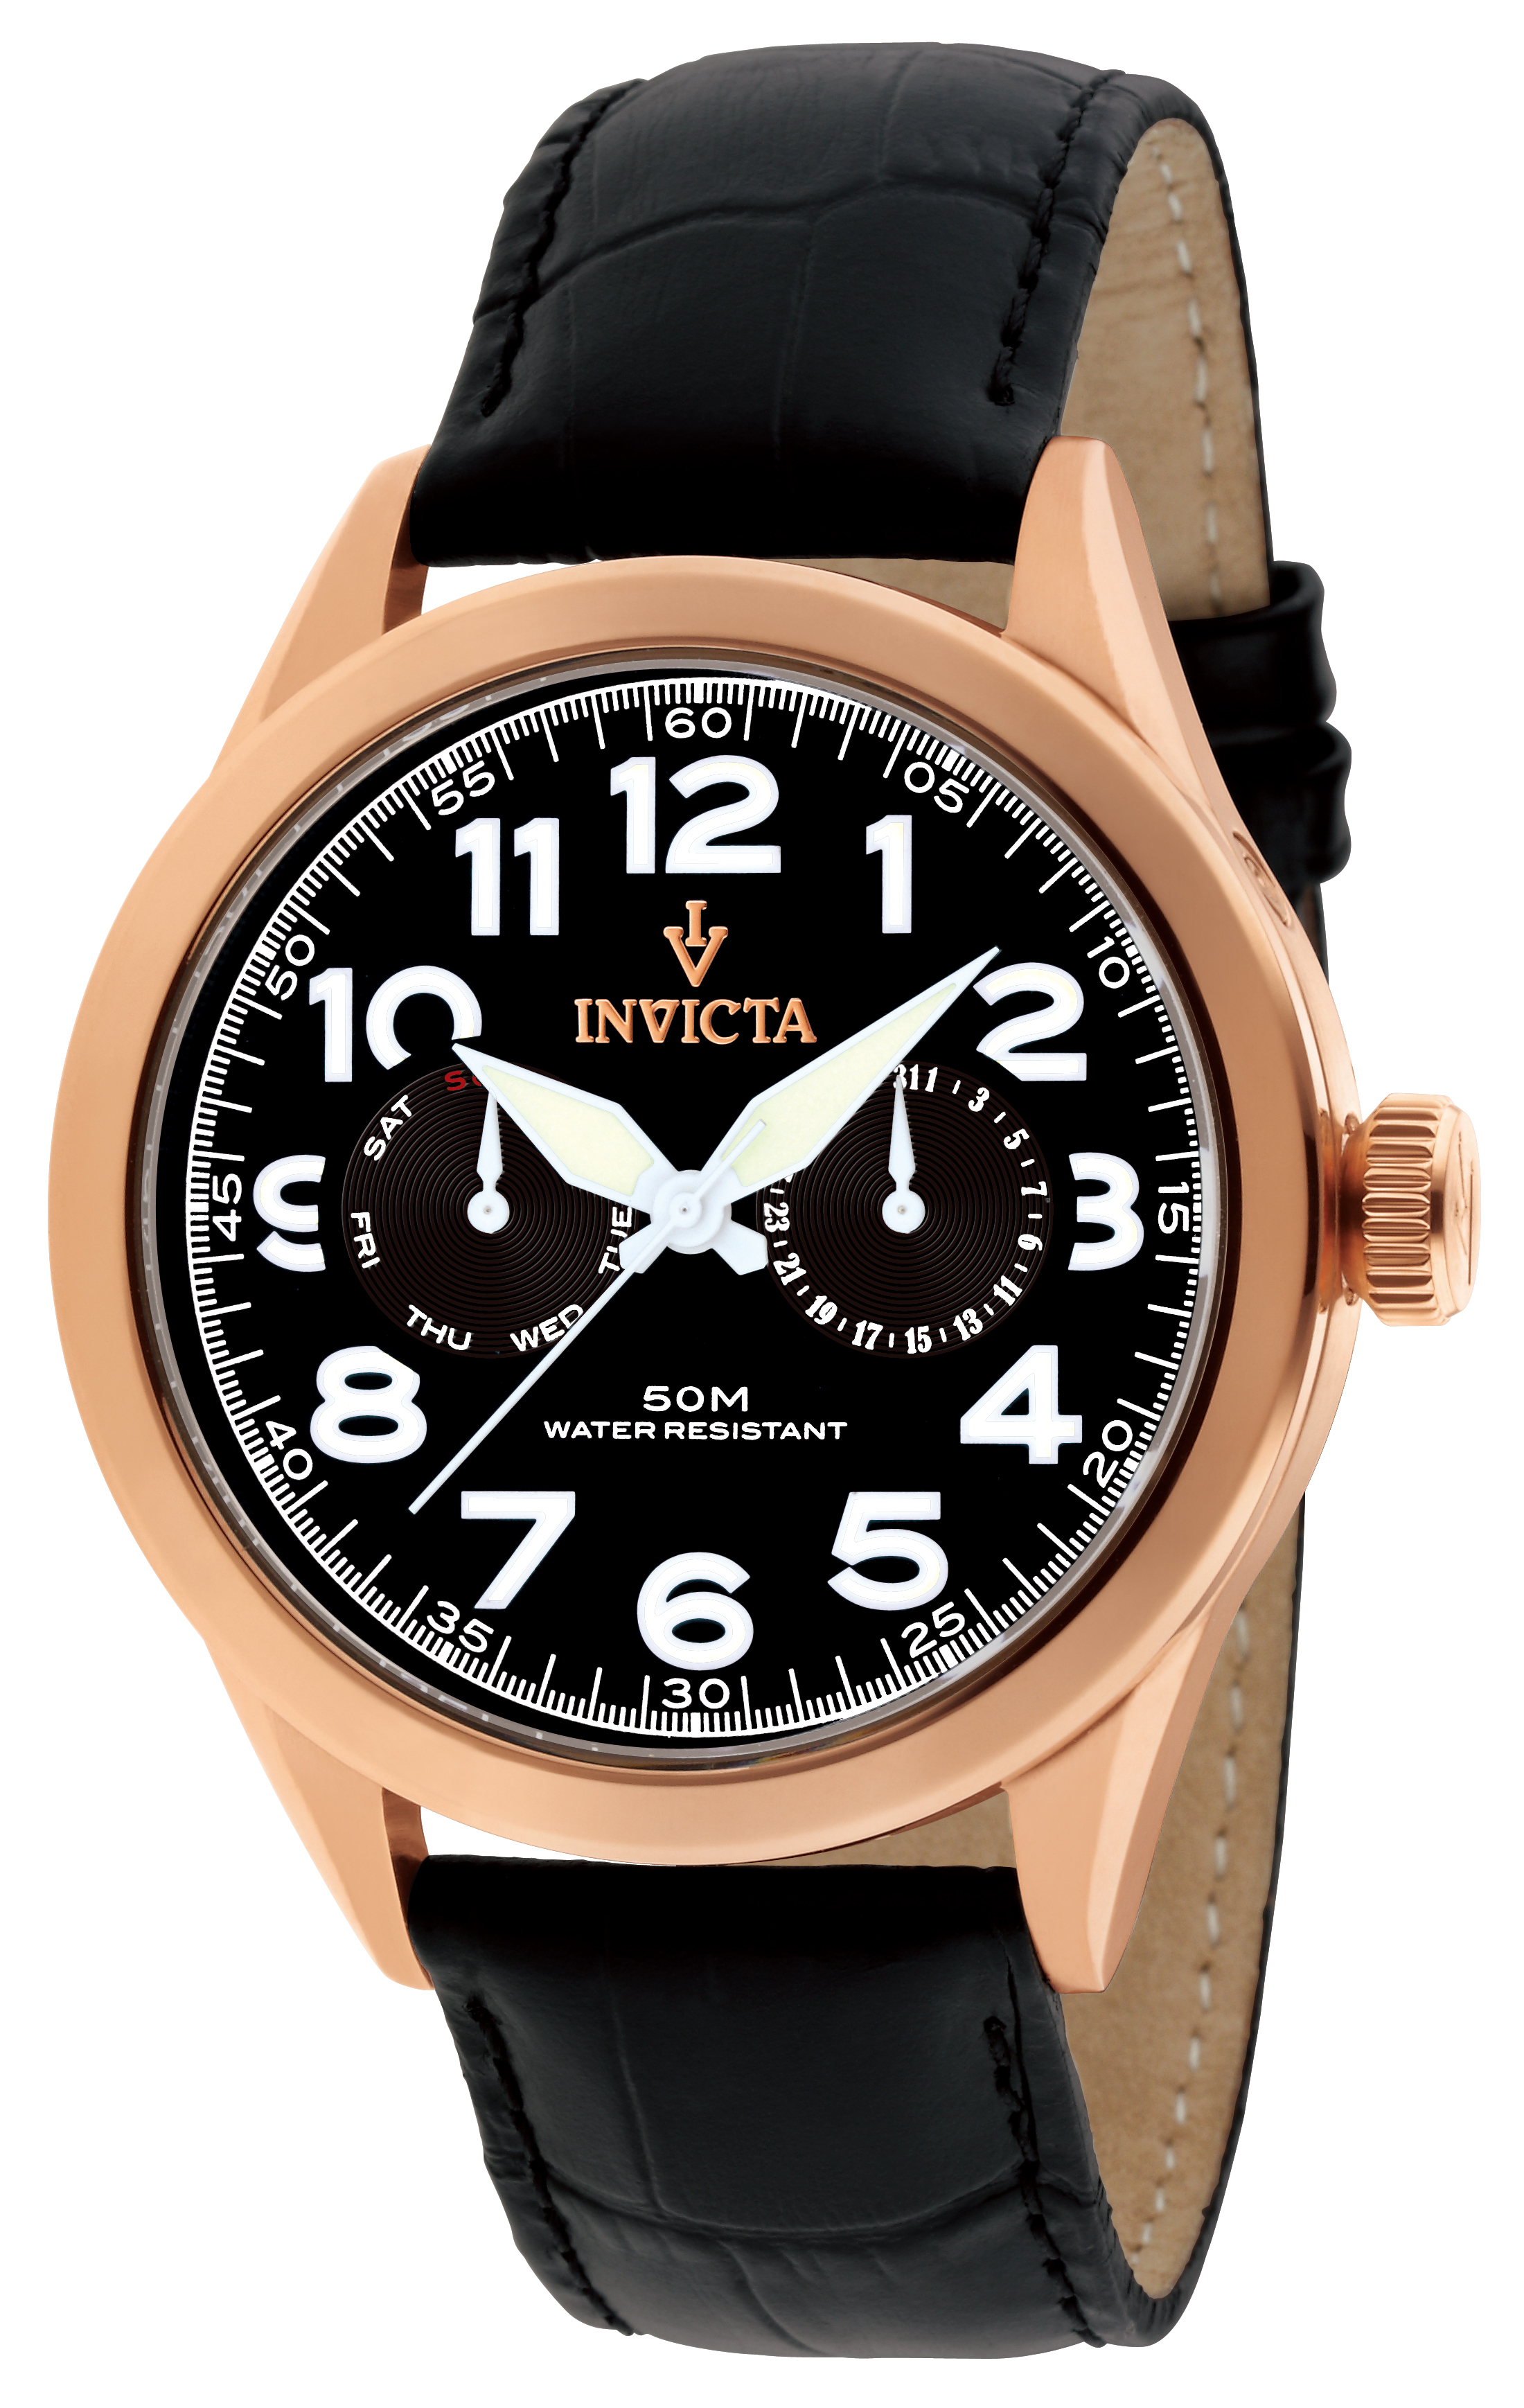 Pre-Owned Invicta Vintage Quartz Men's Watch - 45mm Stainless Steel Case, Leather Band, Black (AIC-11742)